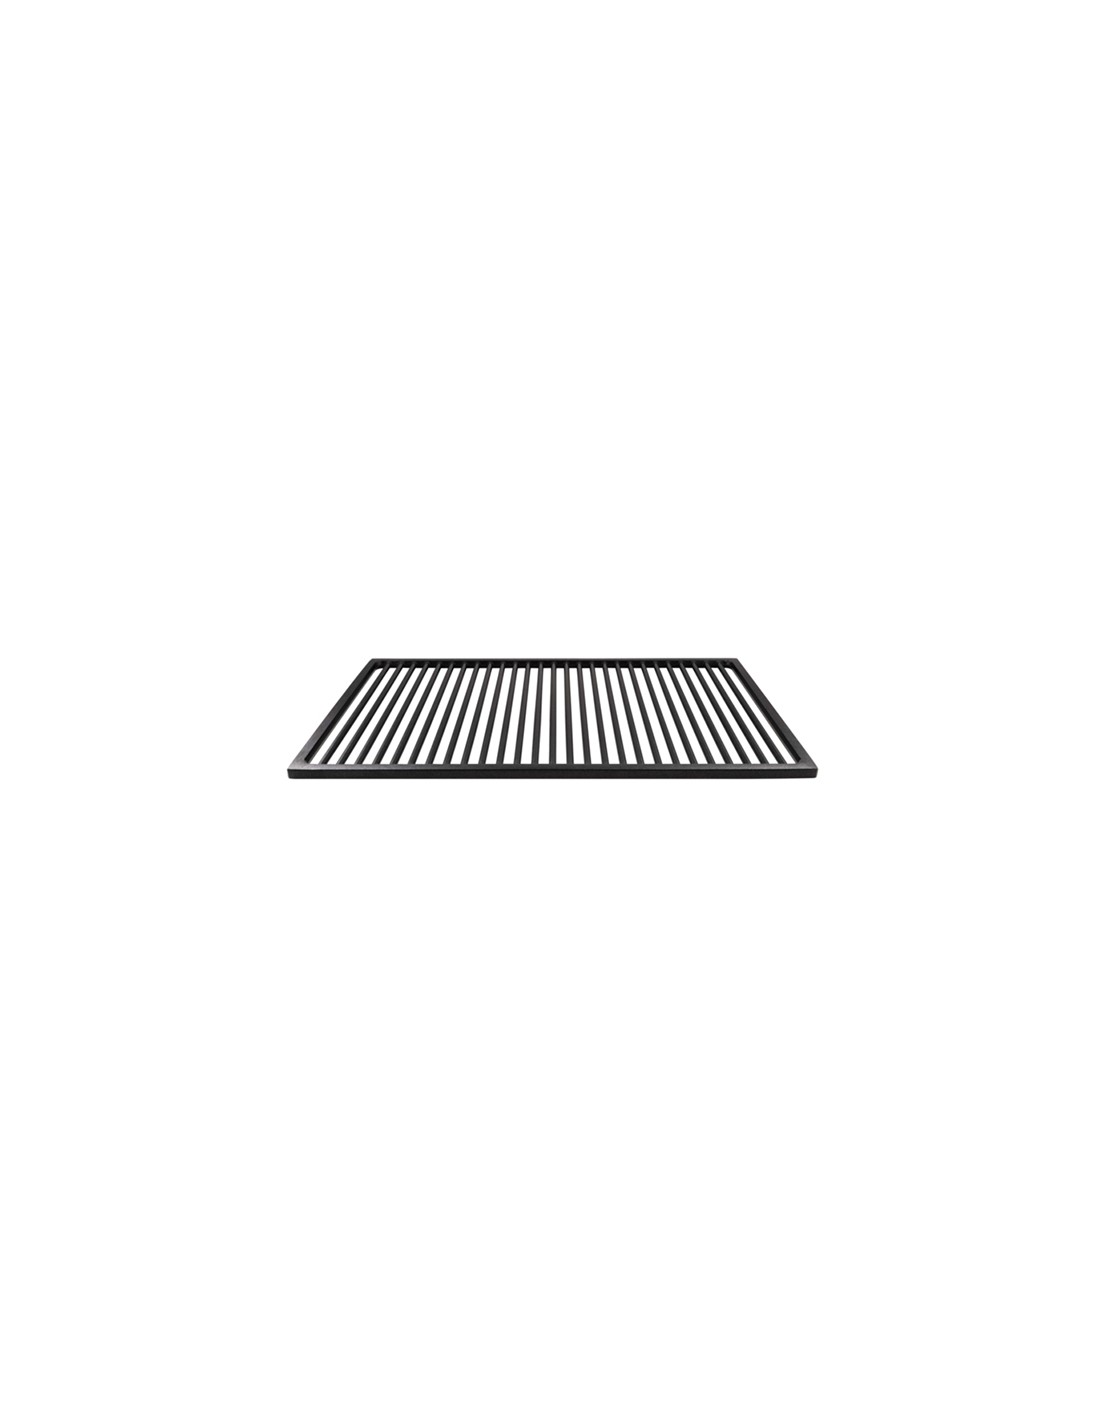 Special grill for vegetables -  Dimensions GN 1/1 (530x325 mm)